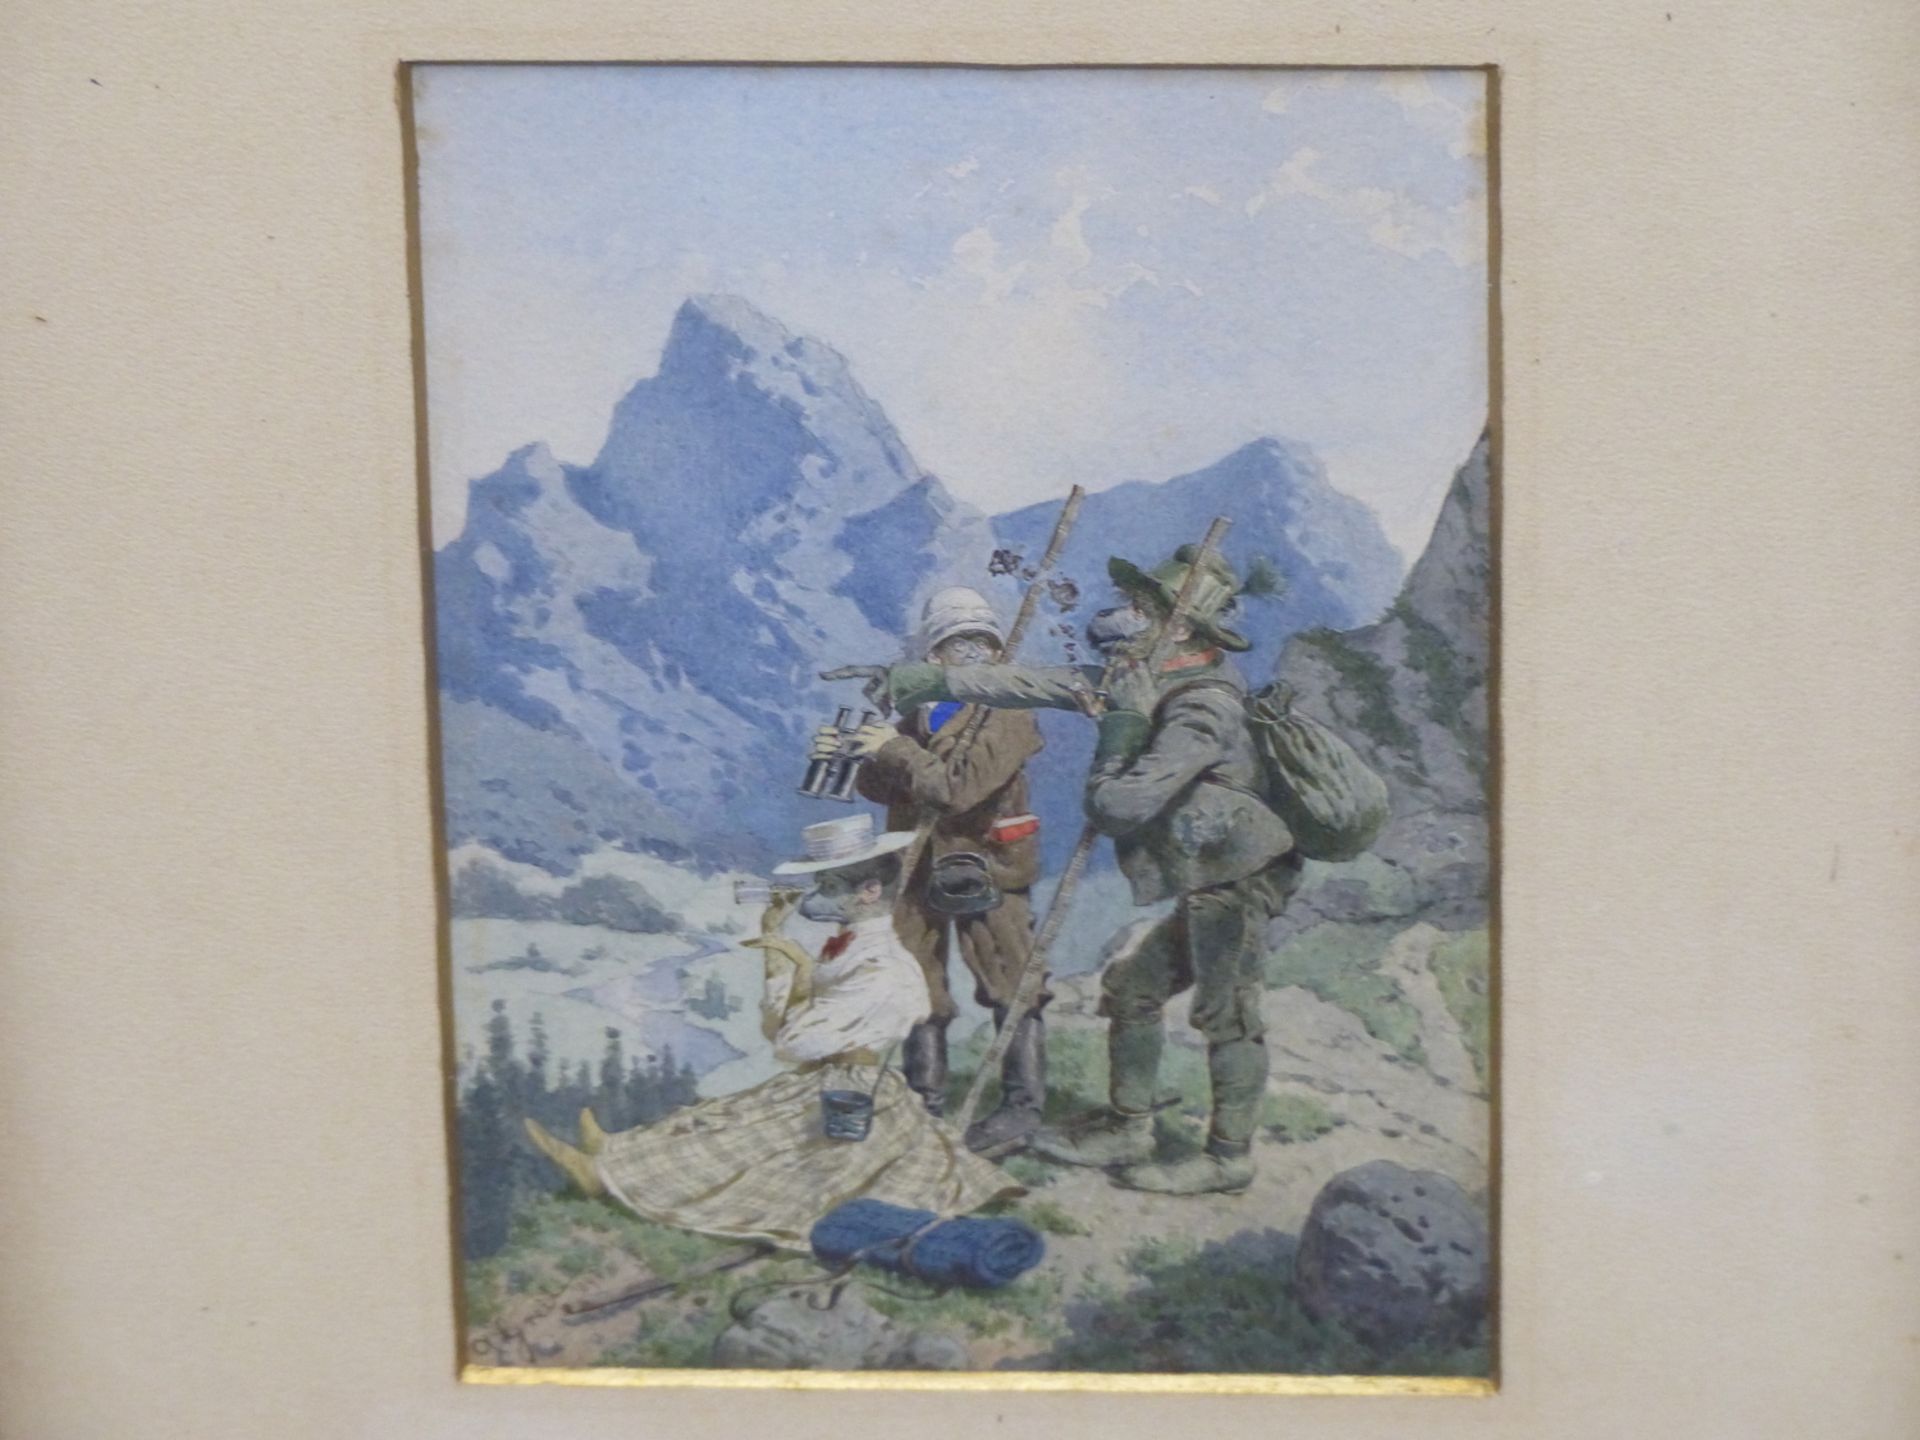 ALOIS GREIL (1842-1902), THREE ANTHROPOMORPHIC CLIMBERS IN THE AUSTRIAN ALPS. WATERCOLOUR, SIGNED - Image 6 of 8